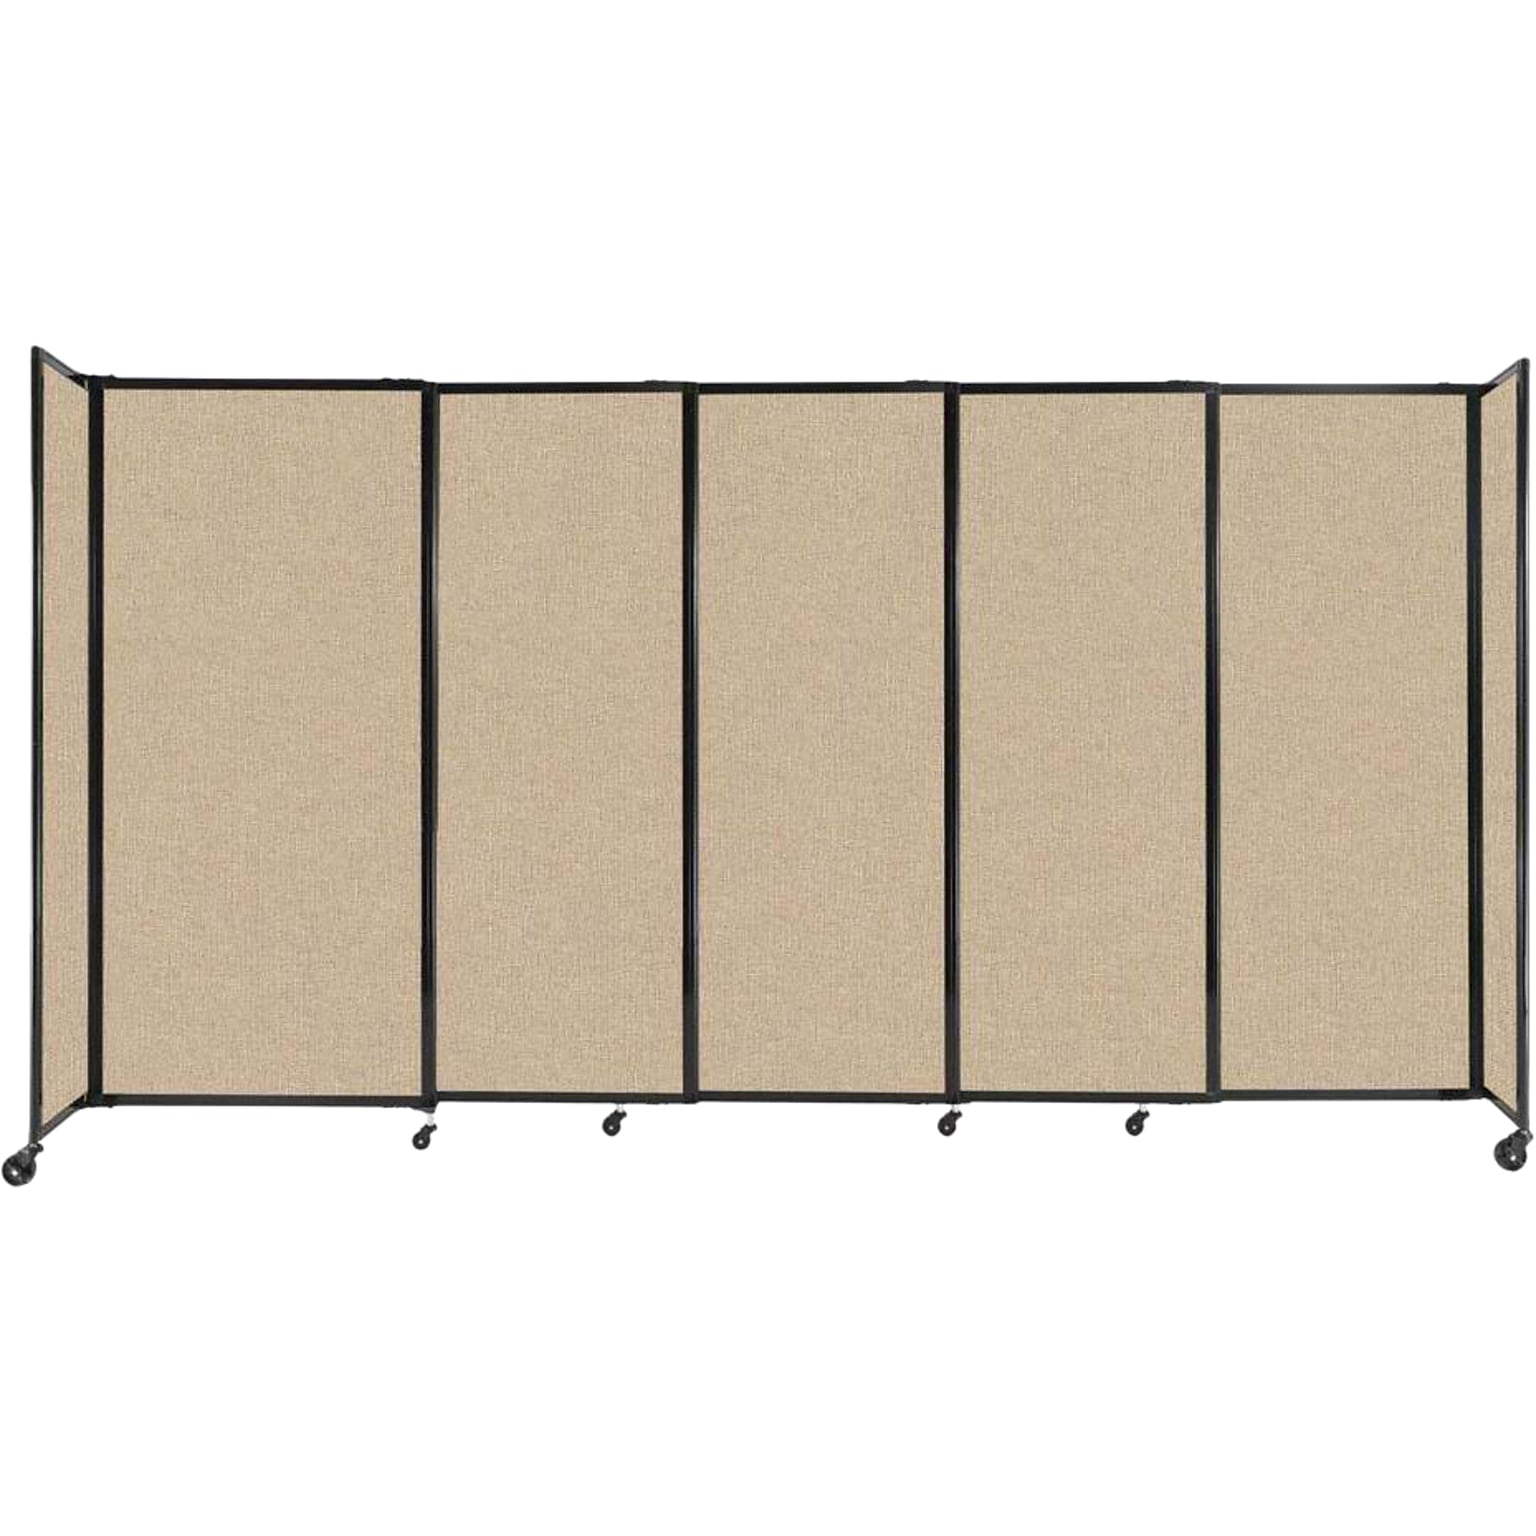 Versare StraightWall Freestanding Mobile Partition, 72H x 135W, Beige Fabric (1472501)